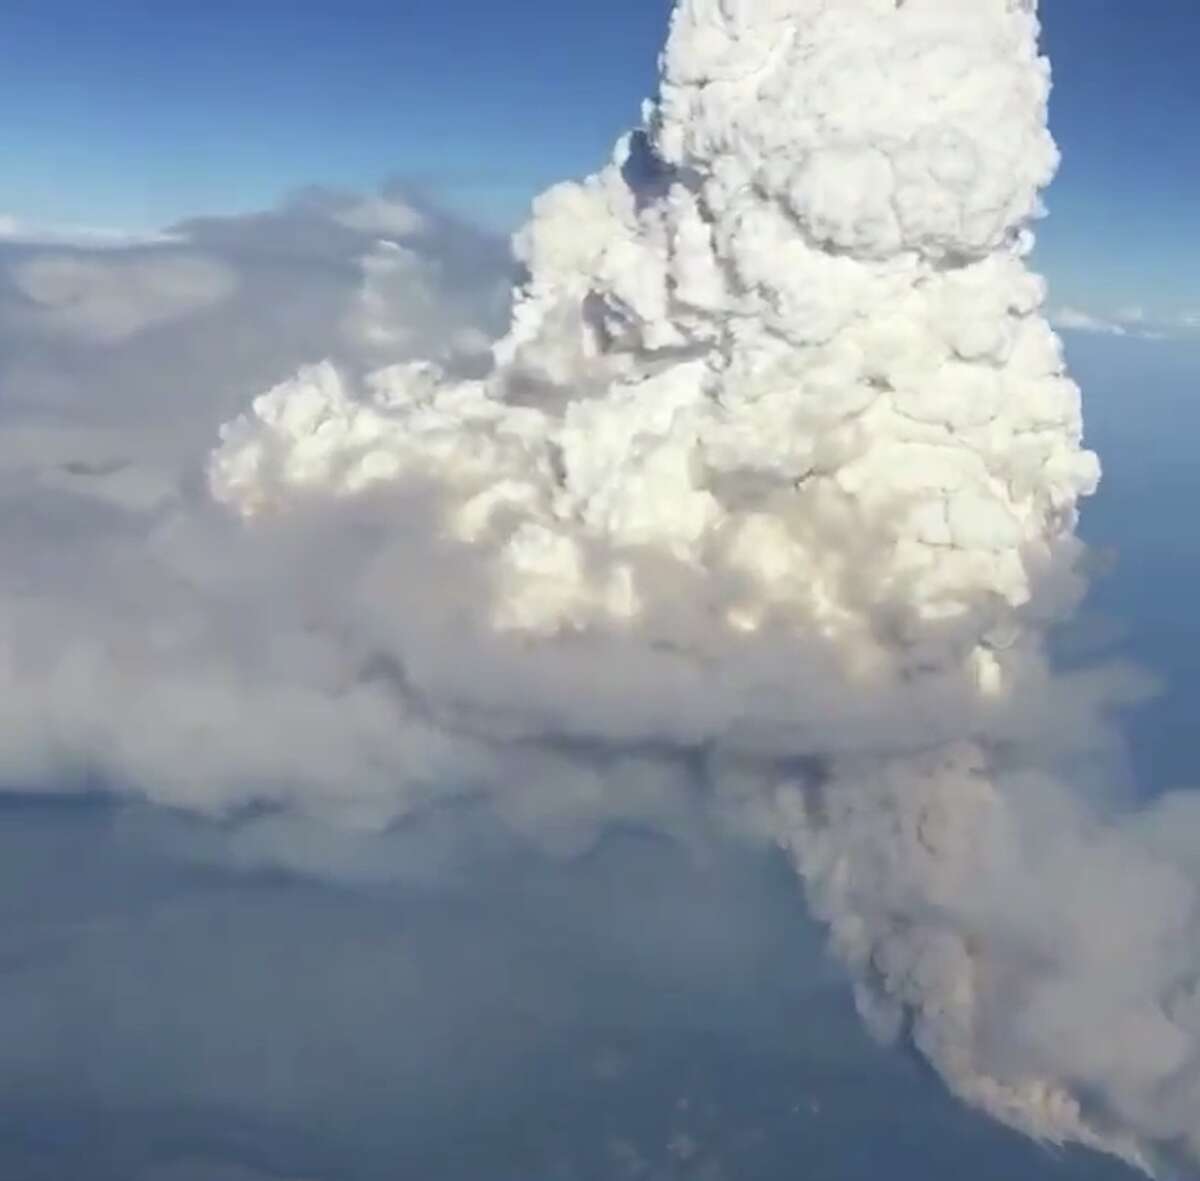 A pyrocumulus cloud formed over the Delta Fire in Shasta County Wednesday.